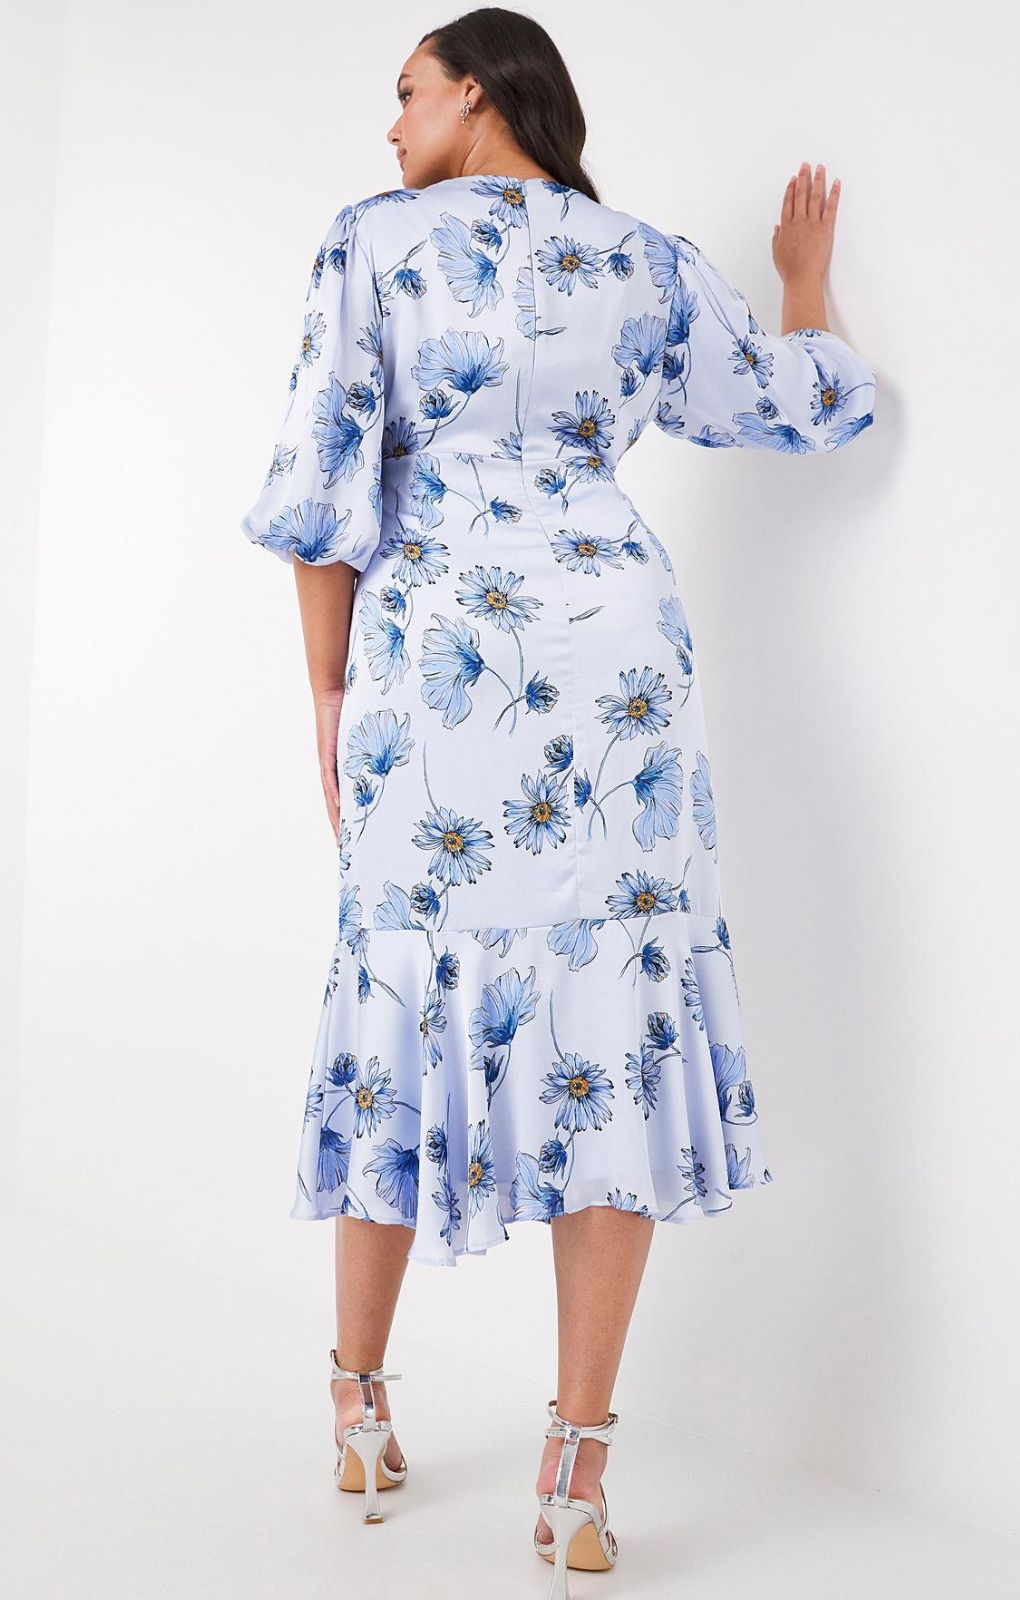 Simply Be Blue Print Satin Dress product image